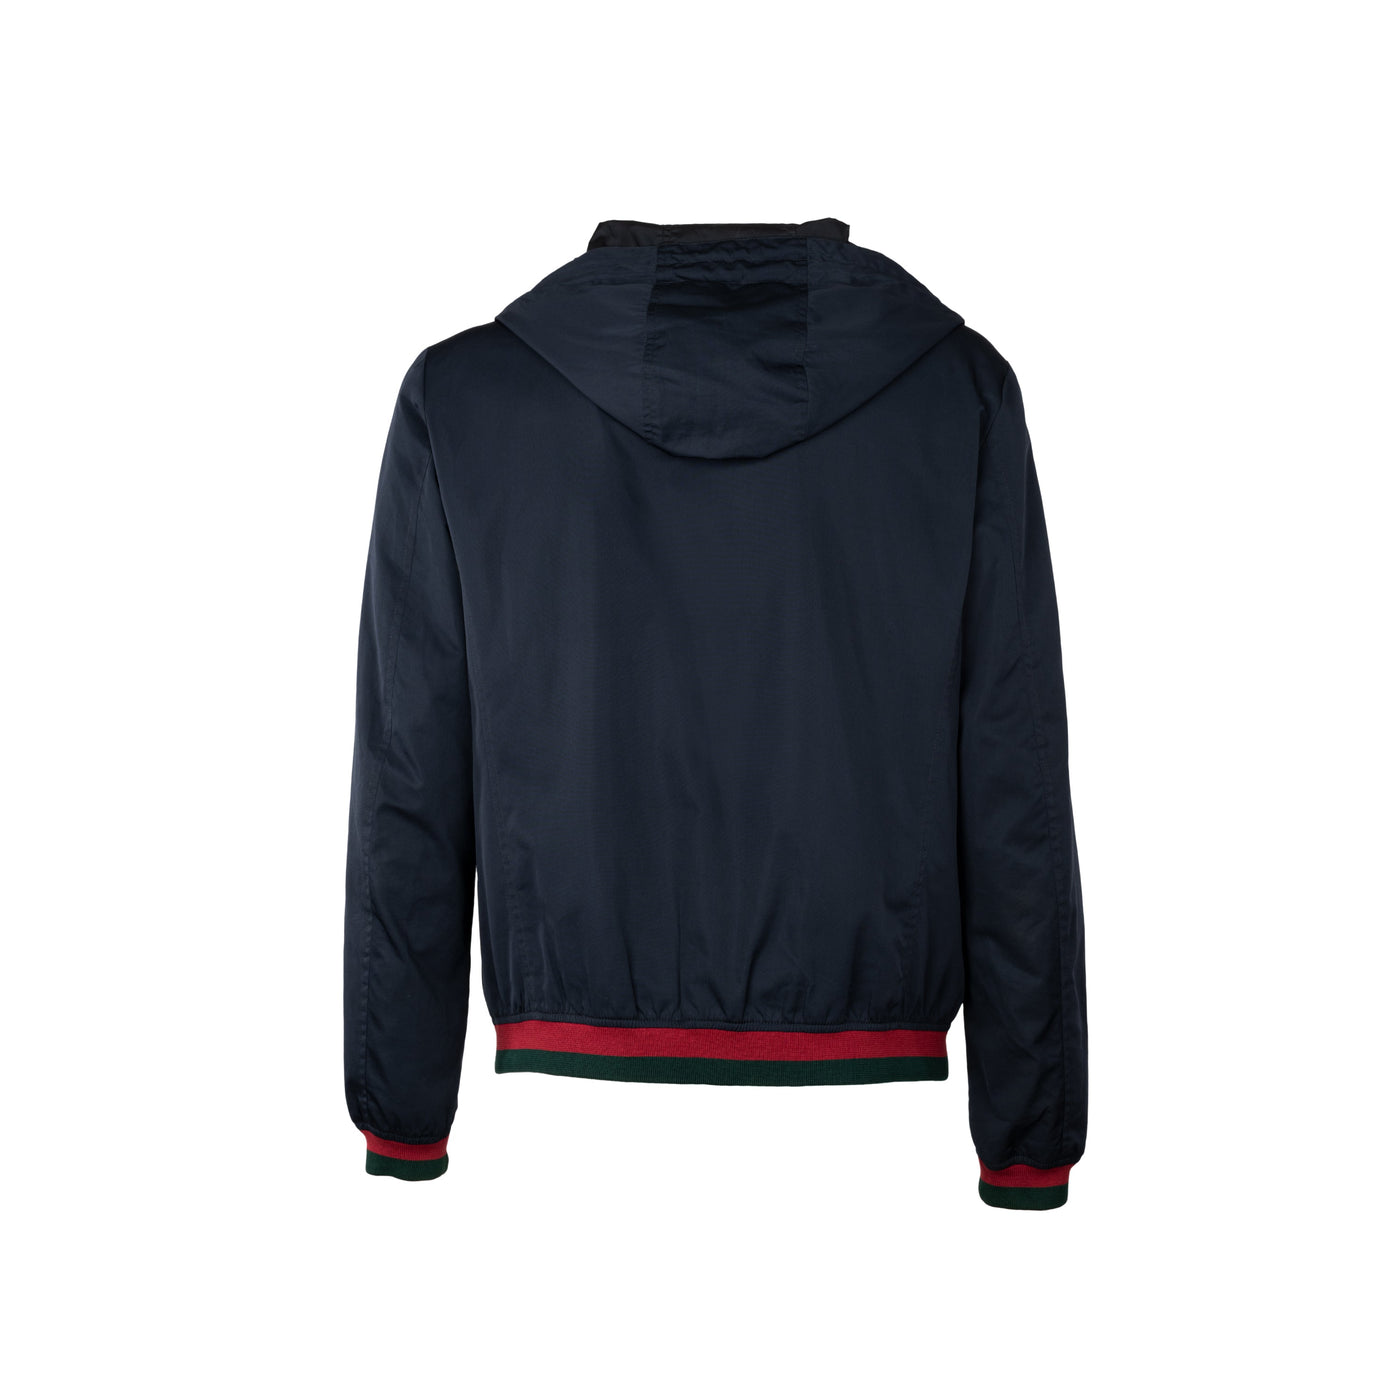 Gucci blue hooded jacket. Long sleeves, zip fastening, front pockets, ribbed hem with green and red details pre-owned